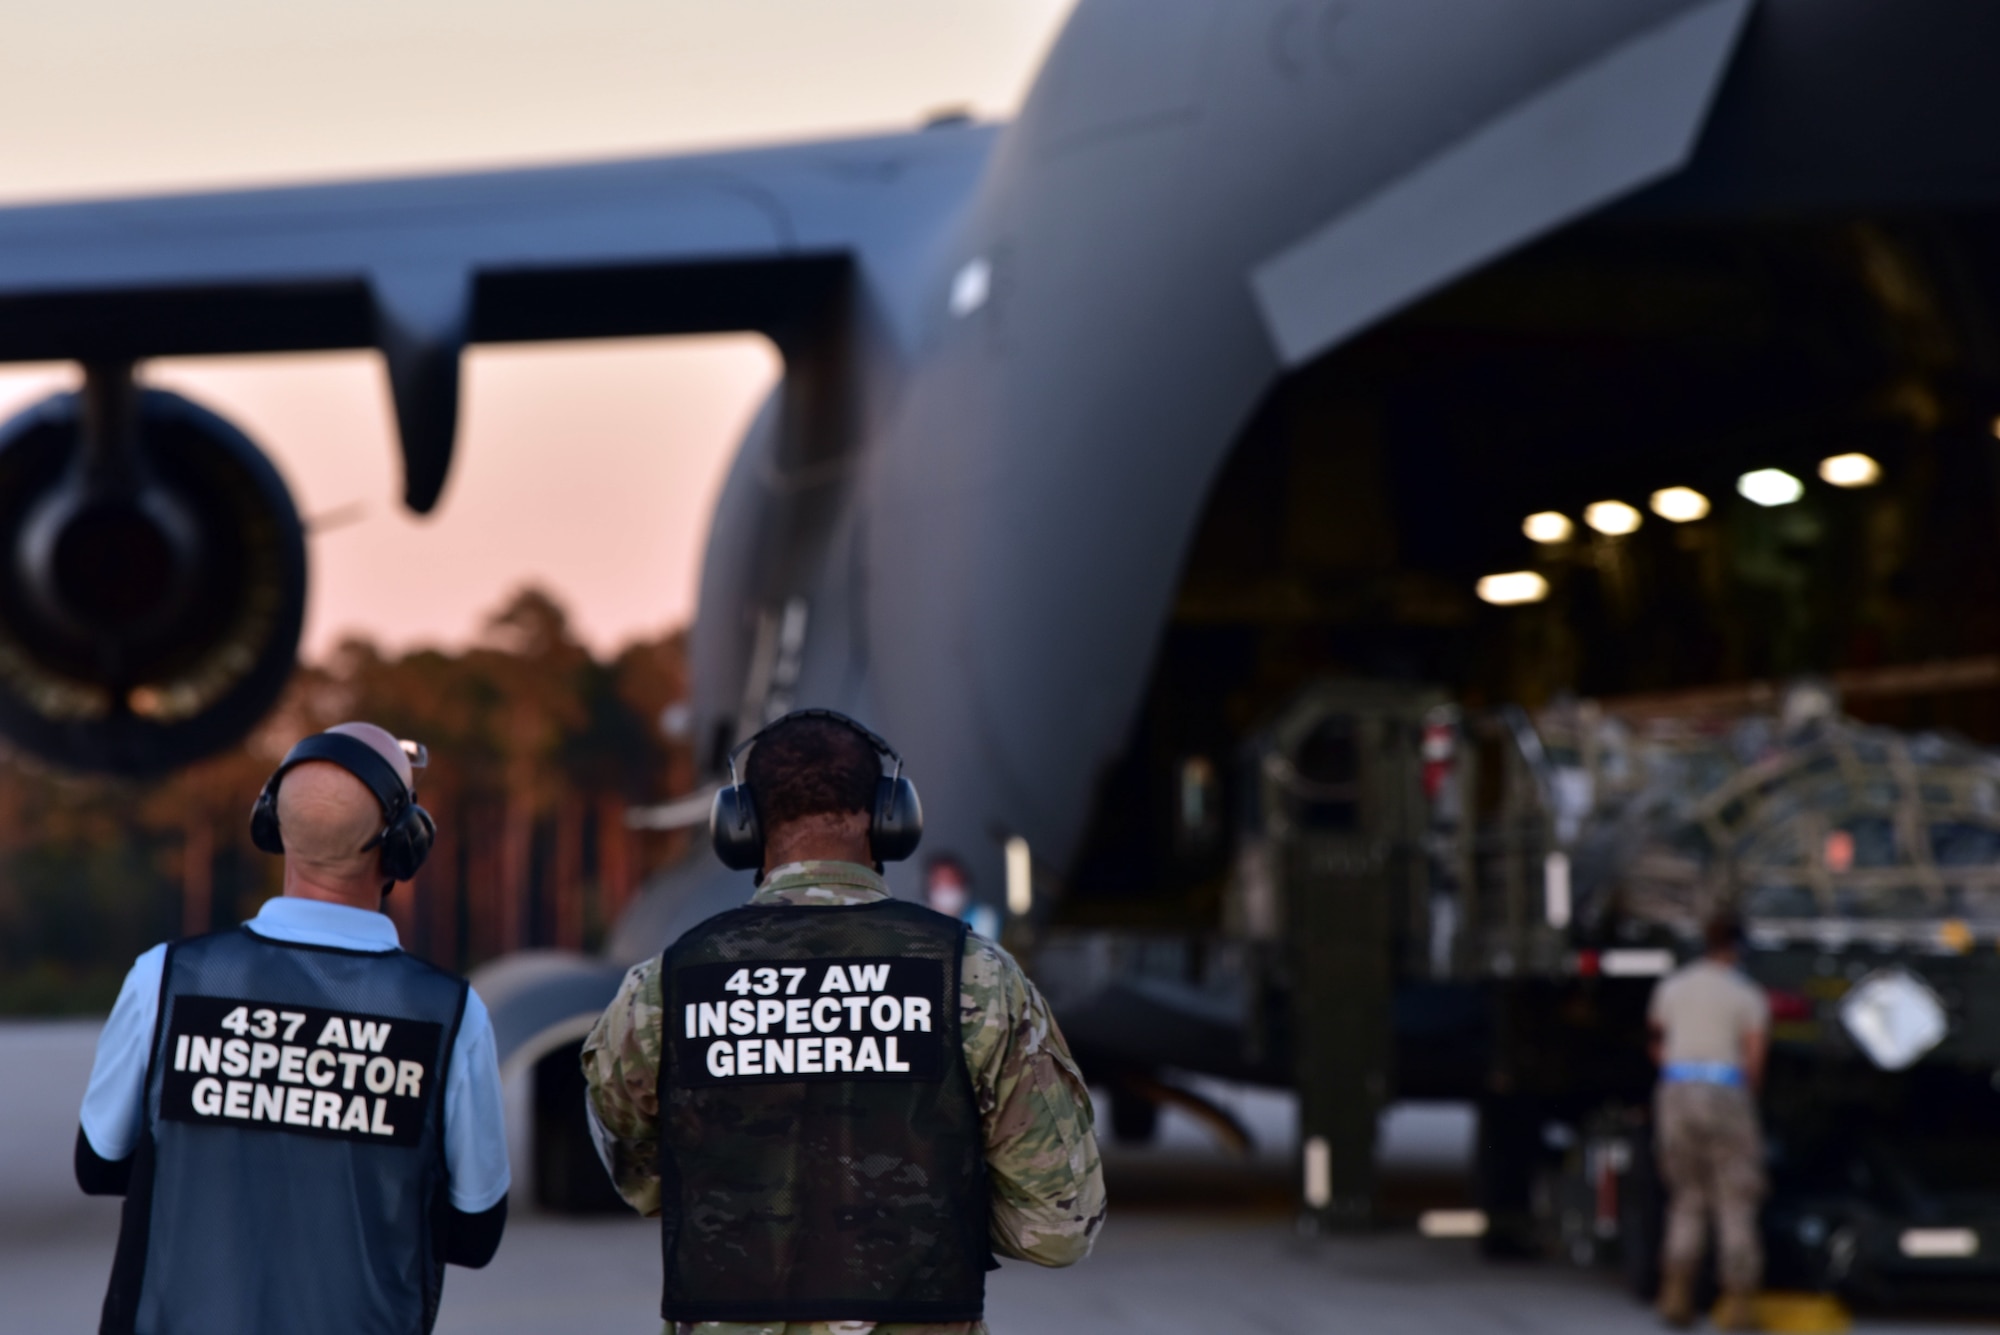 U.S. Air Force Master Sgt. Bradley Moorer, an Inspector General Wing Inspection Team superintendent for the 437th Airlift Wing (left), and Mark Vickers, the 437th AW IG director of inspections (right), watch as a C-17 Globemaster III containing Airmen and supplies lands, at McEntire Joint National Guard Base, S.C., Nov. 16, 2020. Palmetto Challenge is a global mobilization exercise held at McEntire Joint National Guard Base, S.C. The exercise is held in order to develop readiness and awareness in a simulated deployed environment for over 100 Airmen from Joint Base Charleston.